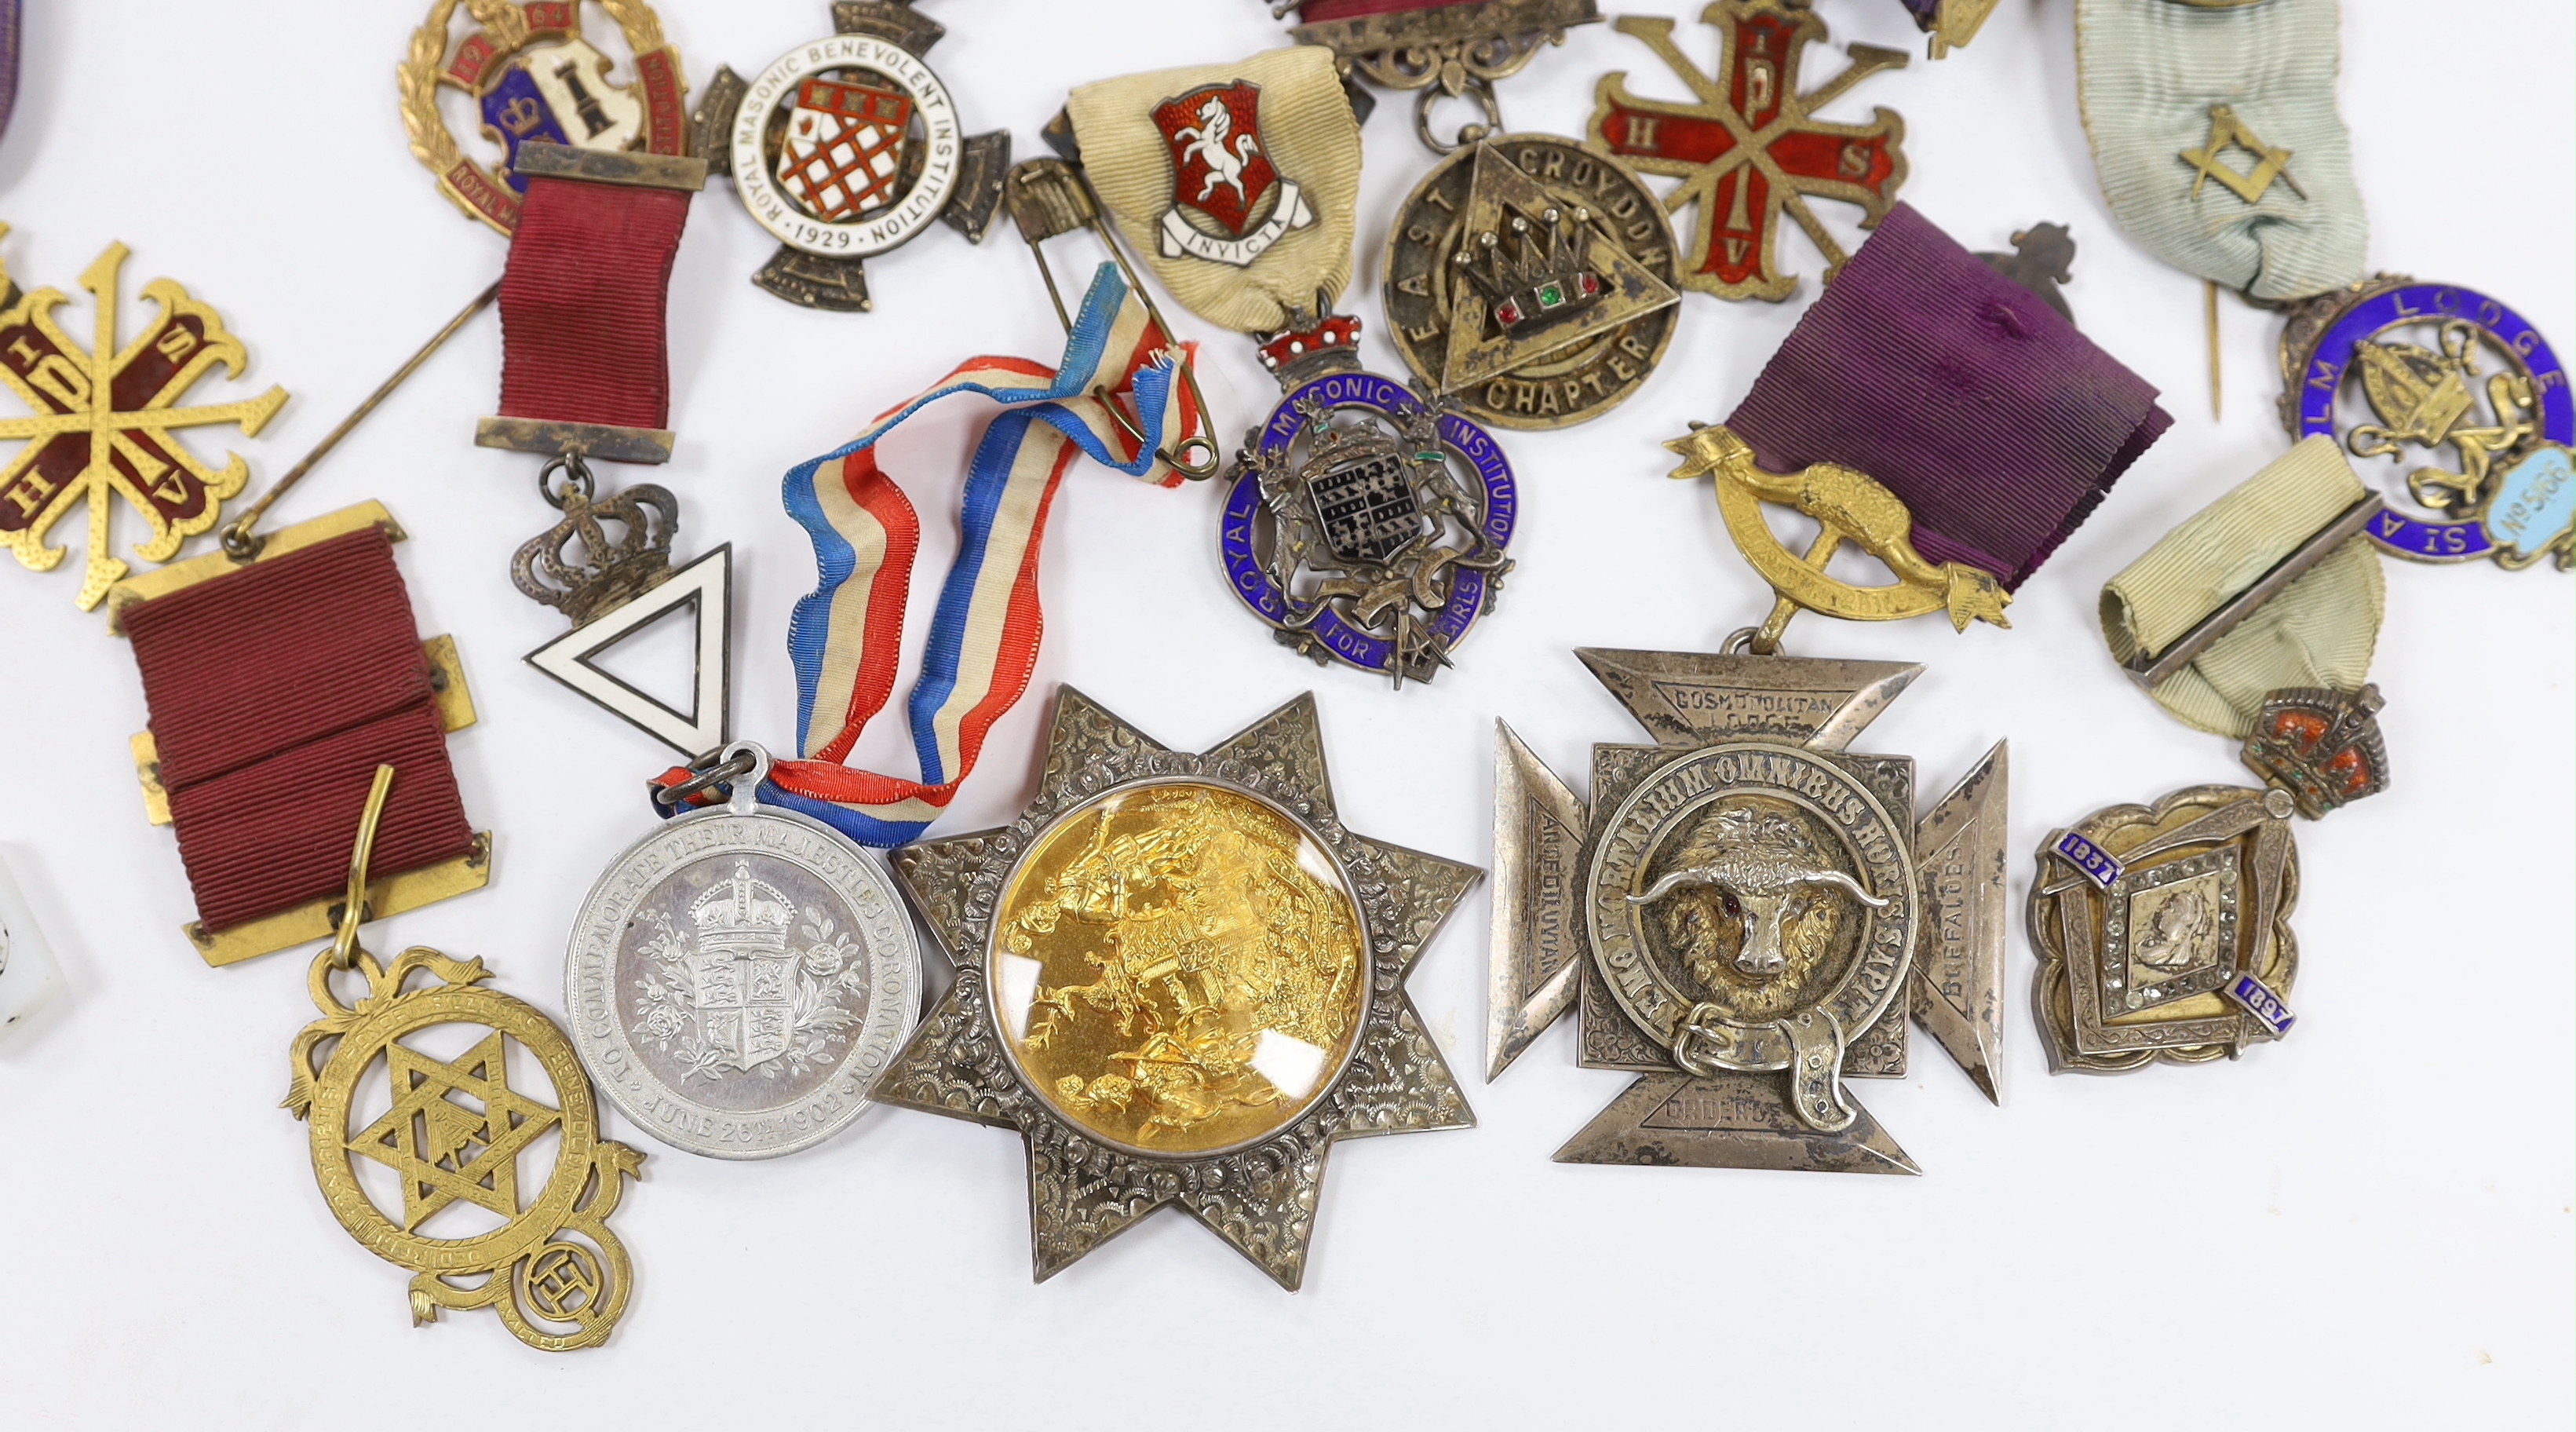 Fourteen Masonic and Order of Buffaloes medals, including enamelled examples, named lodges and silver hallmarked examples